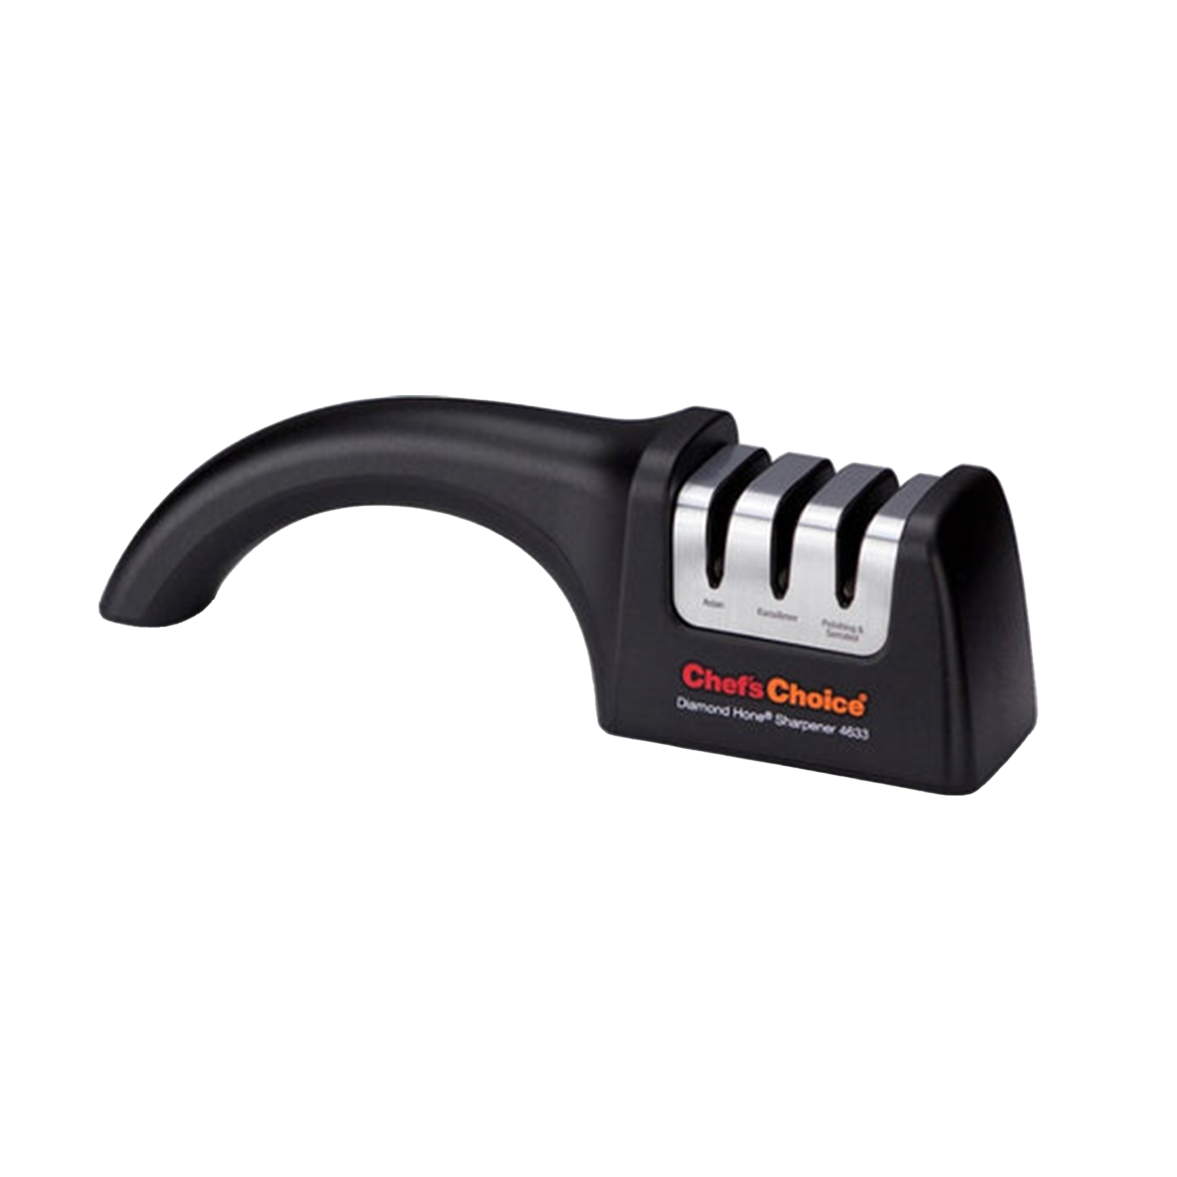 Edlund 401 NSF Electric Knife Sharpener with Removable Guidance System -  115V